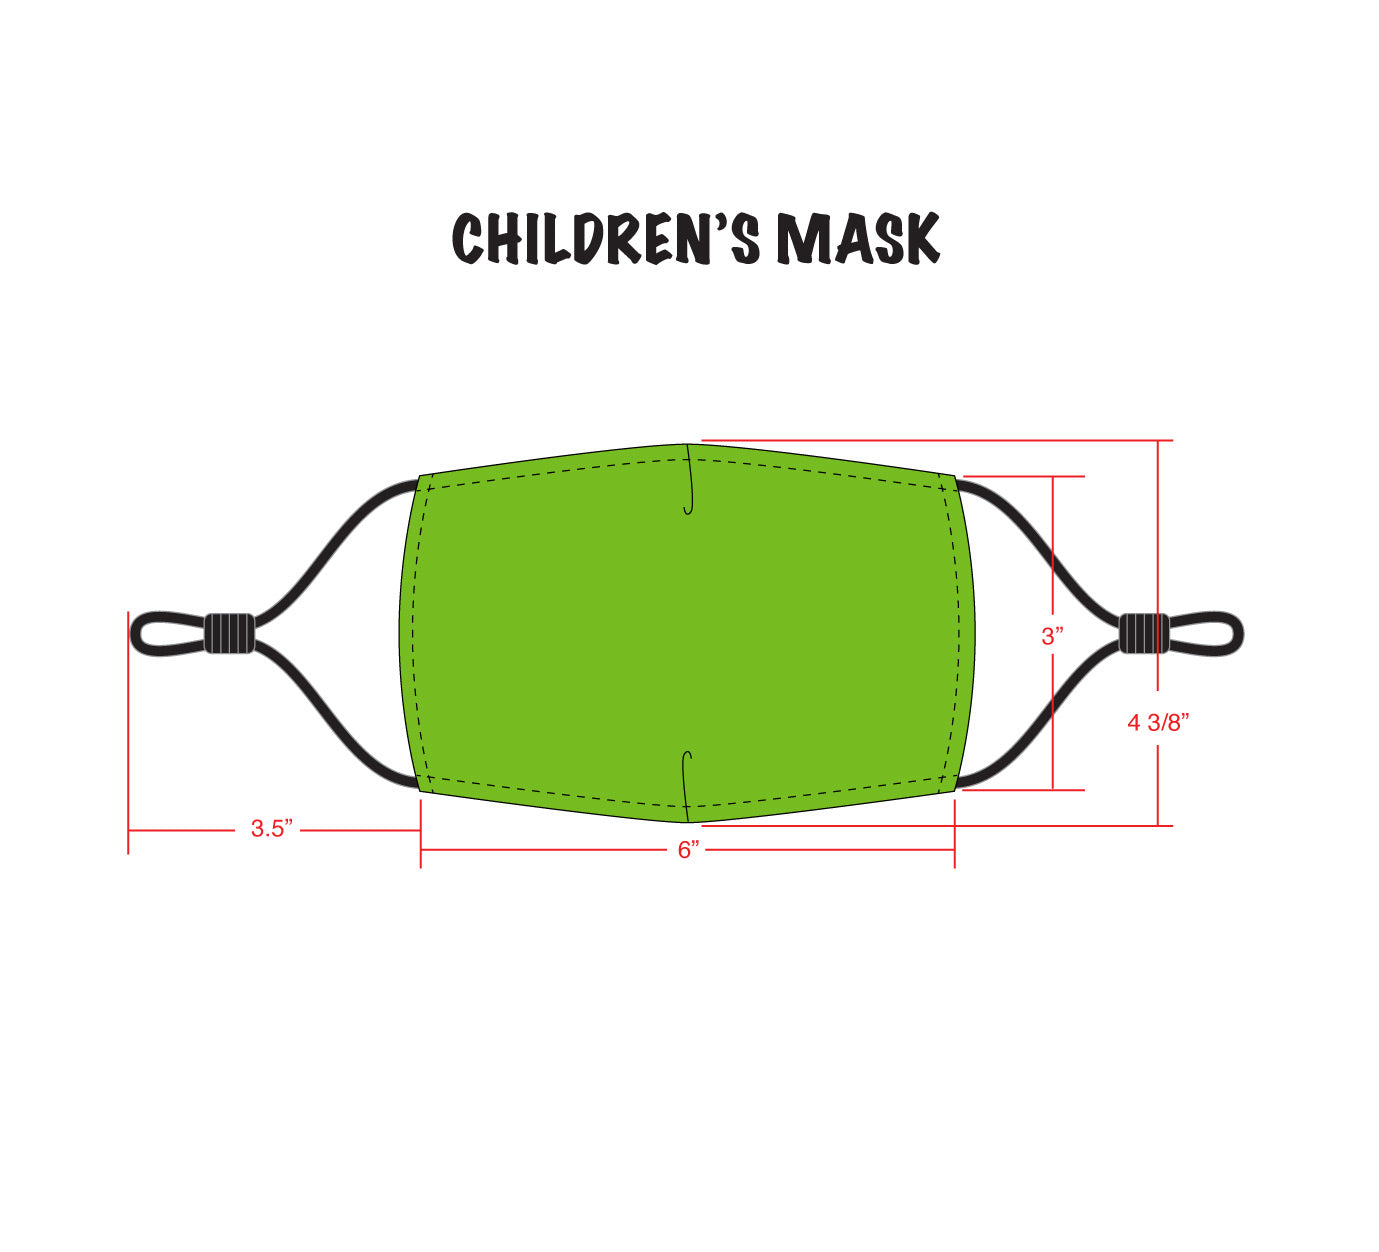 Ed Heck Halloween Children's Face Mask & Travel Pouch